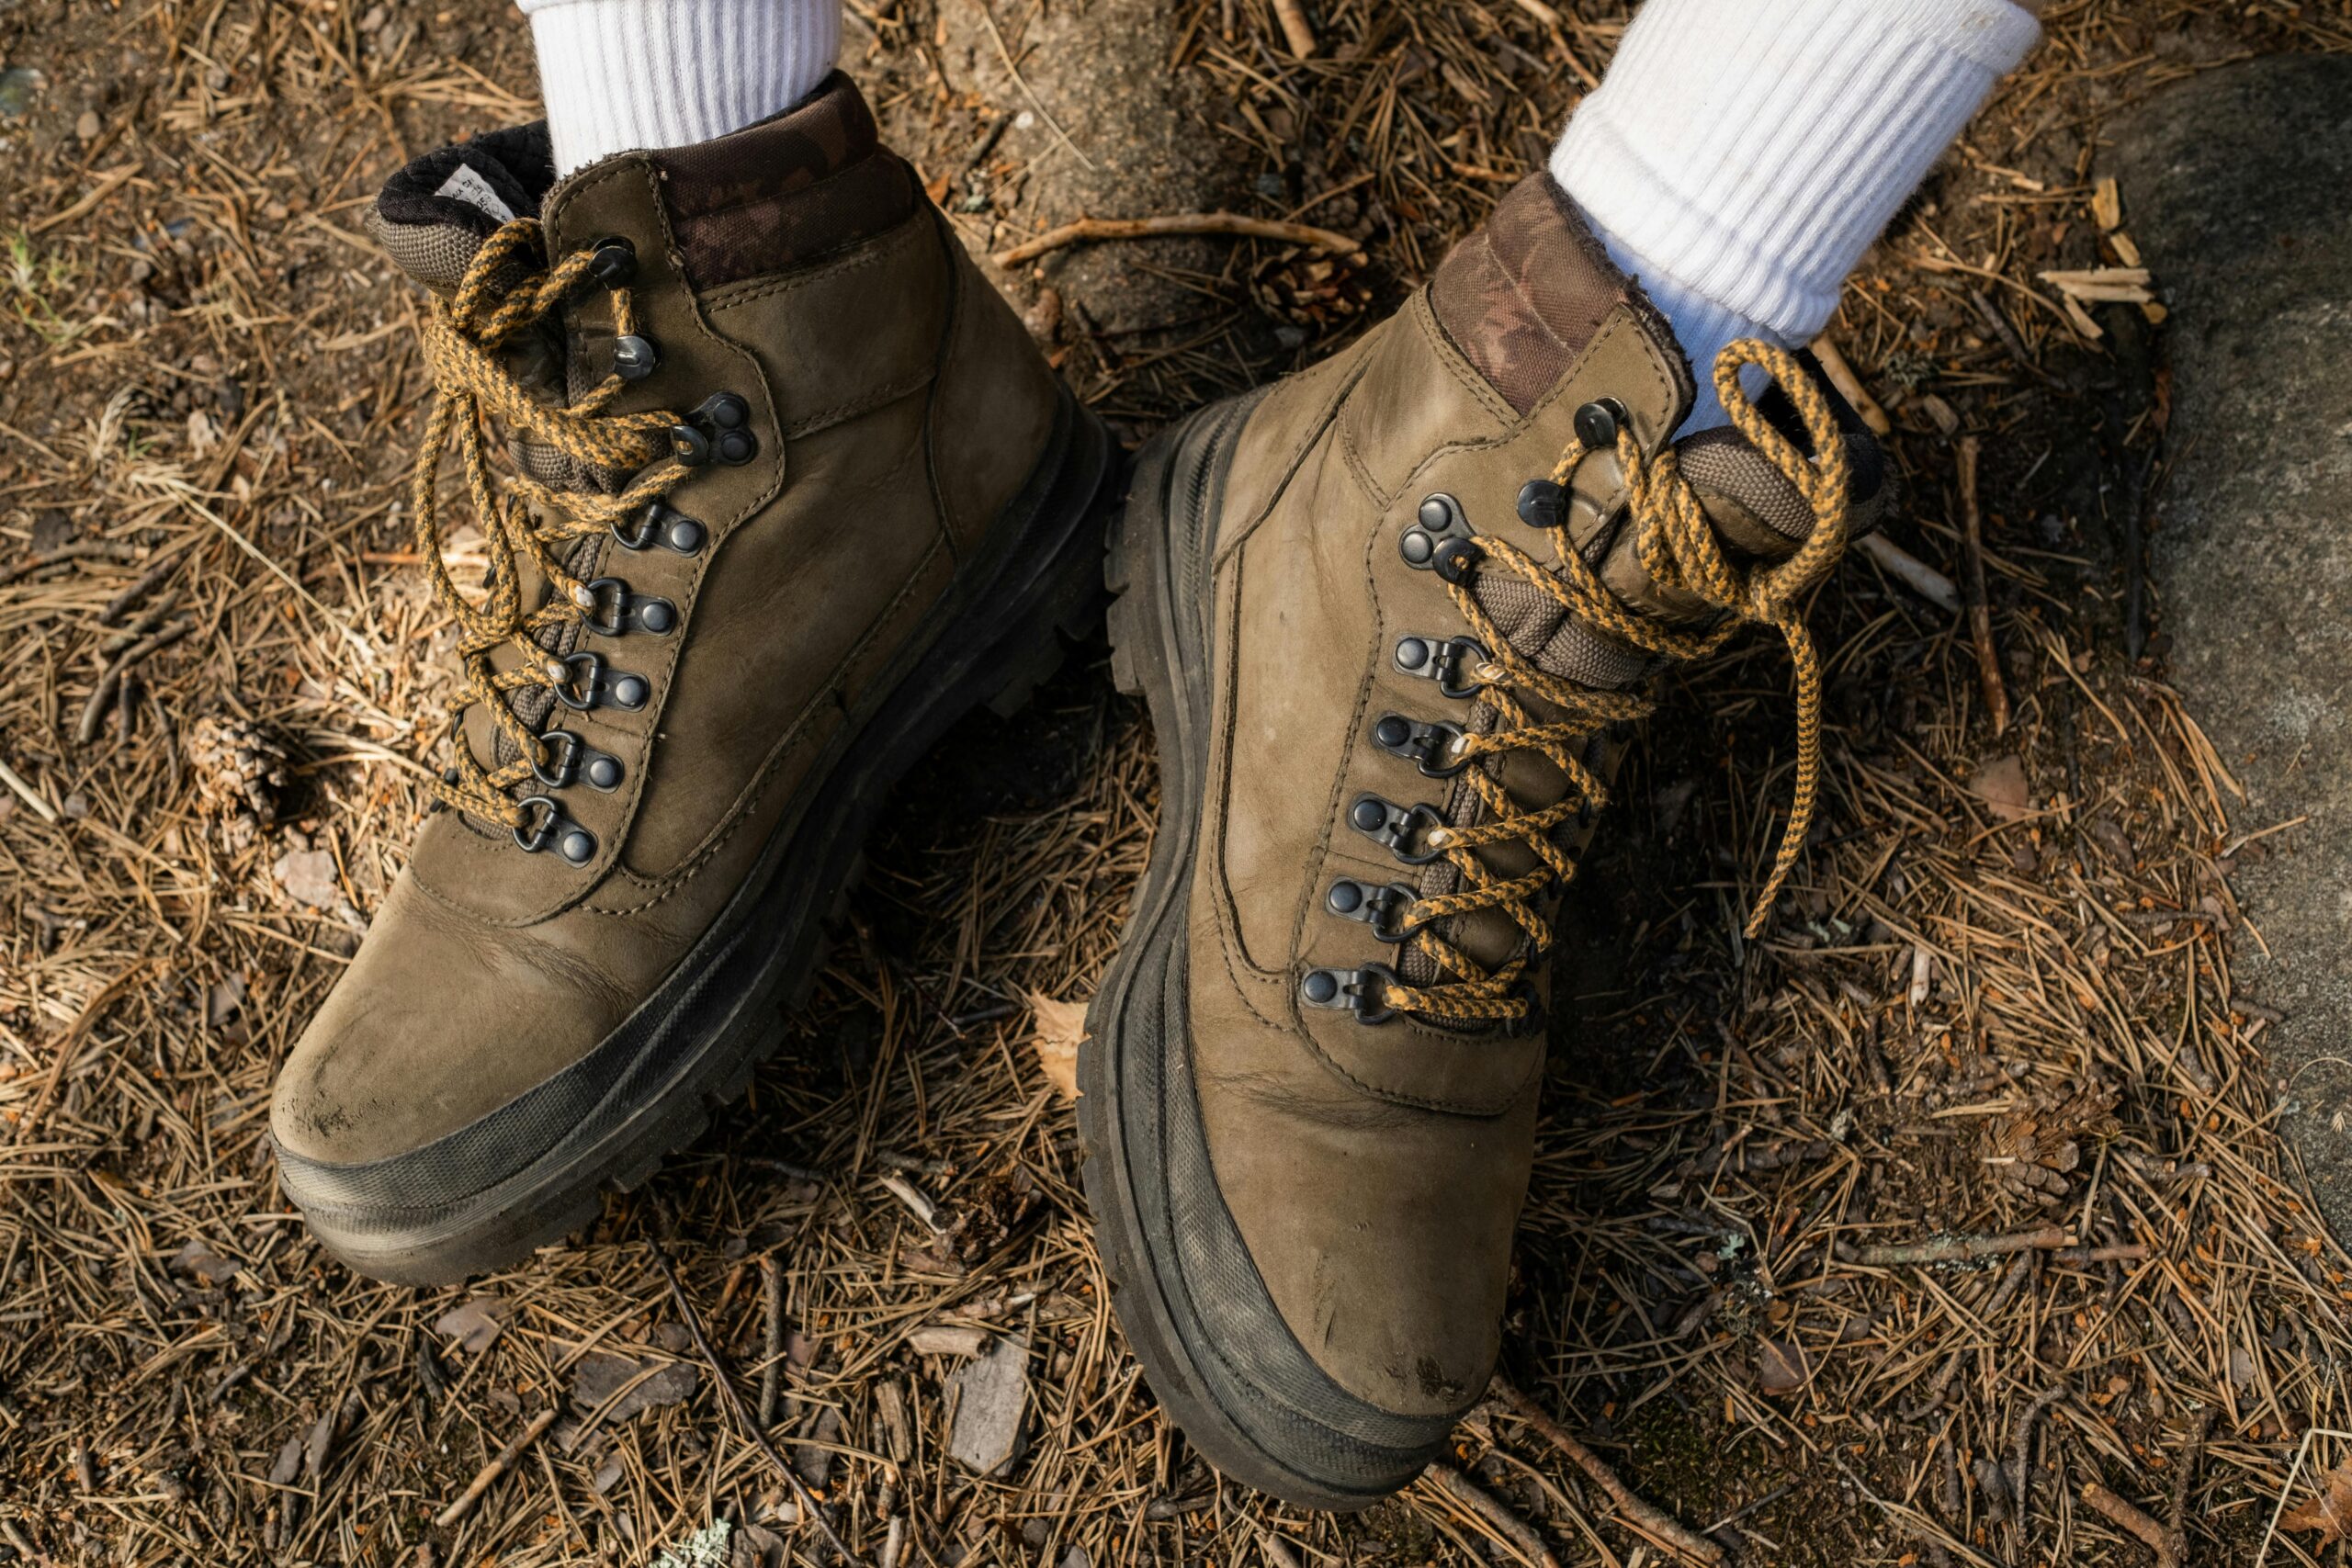 Tips for selecting summertime safety boots